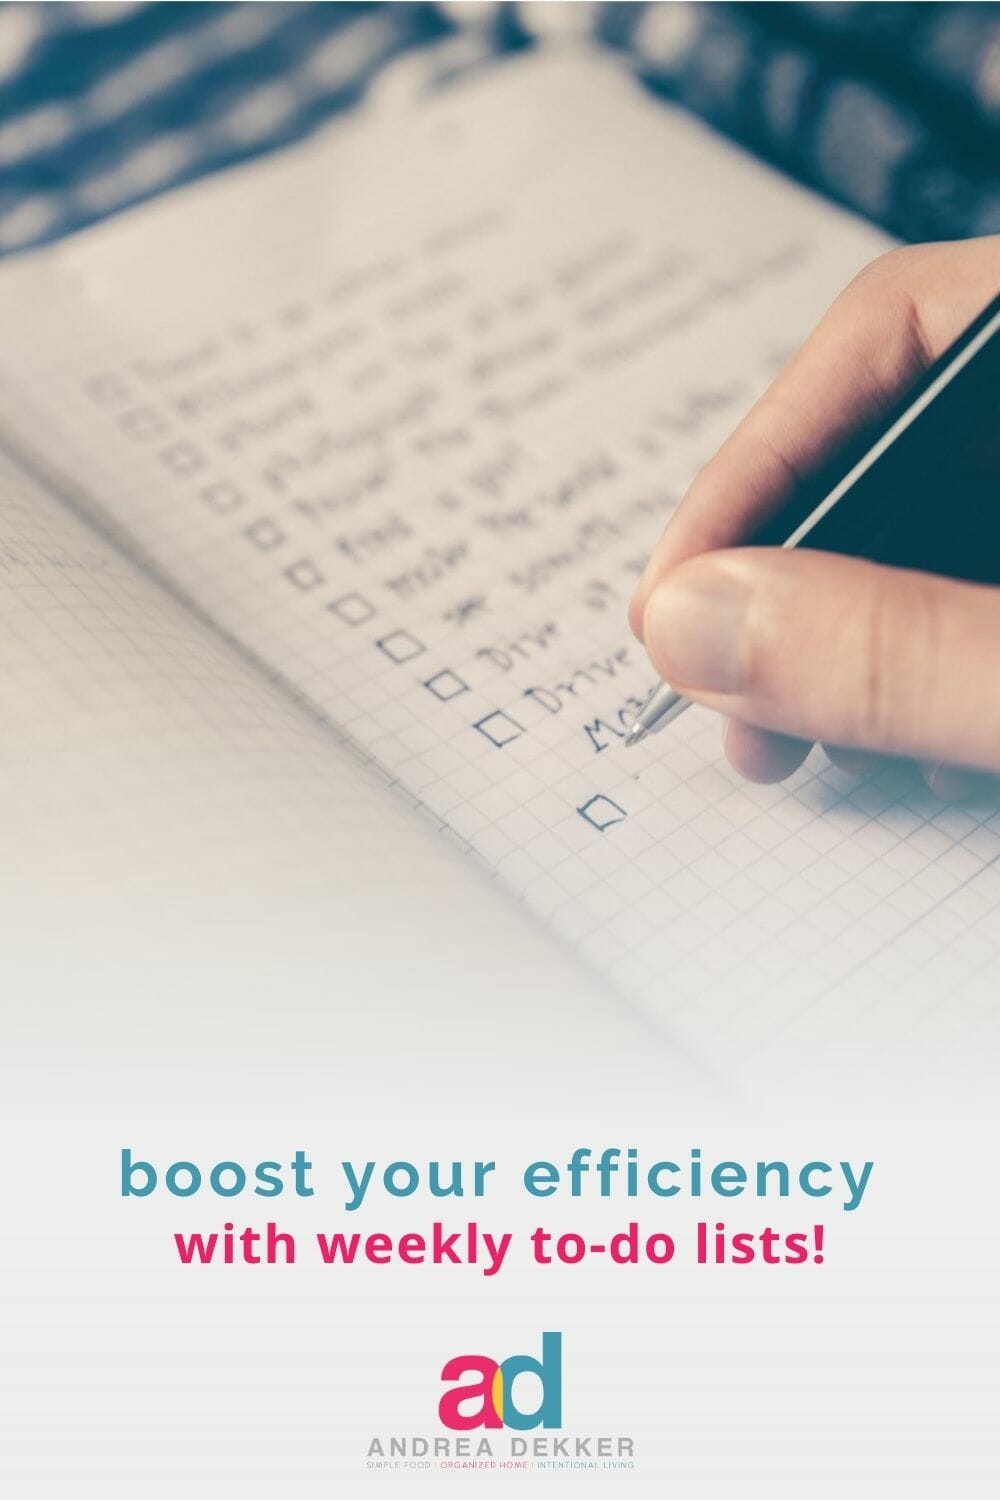 Make more time for the activities you actually enjoy by improving your efficiency with weekly to-do lists. I’ll show you how! via @andreadekker